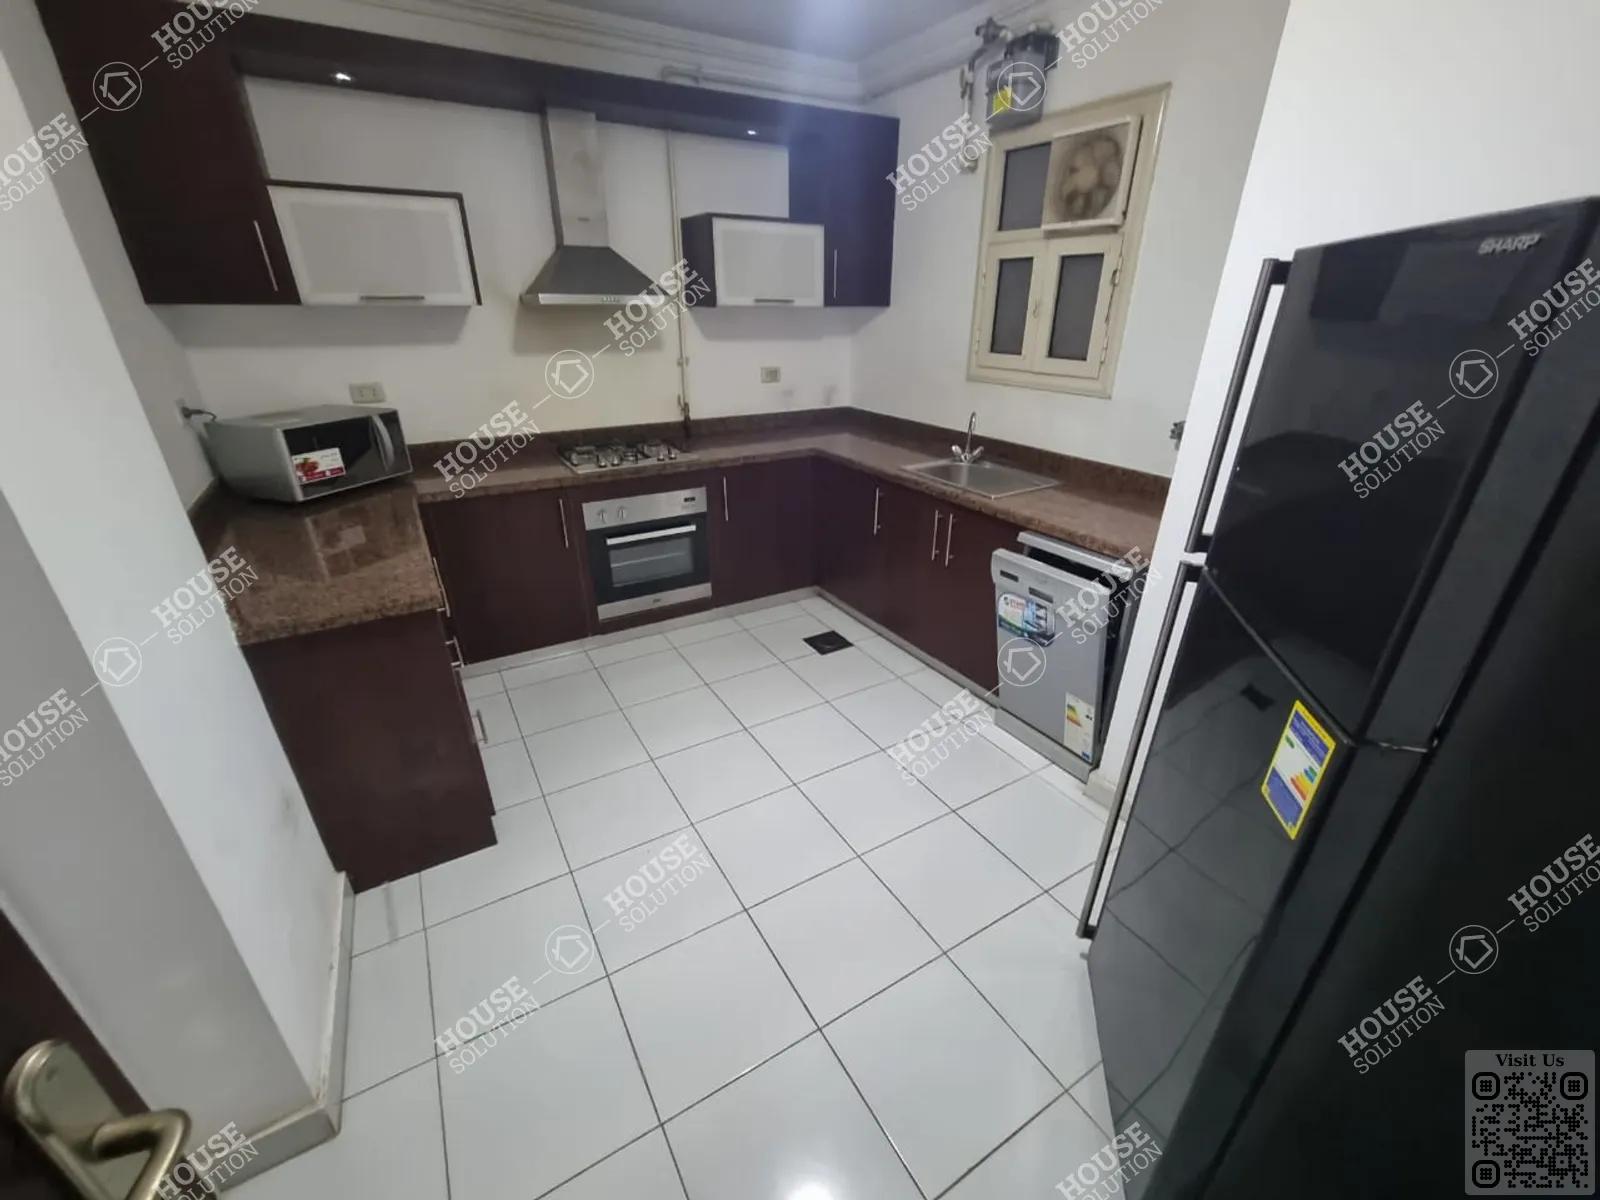 KITCHEN  @ Apartments For Rent In Maadi Maadi Sarayat Area: 200 m² consists of 3 Bedrooms 2 Bathrooms Modern furnished 4 stars #5200-1